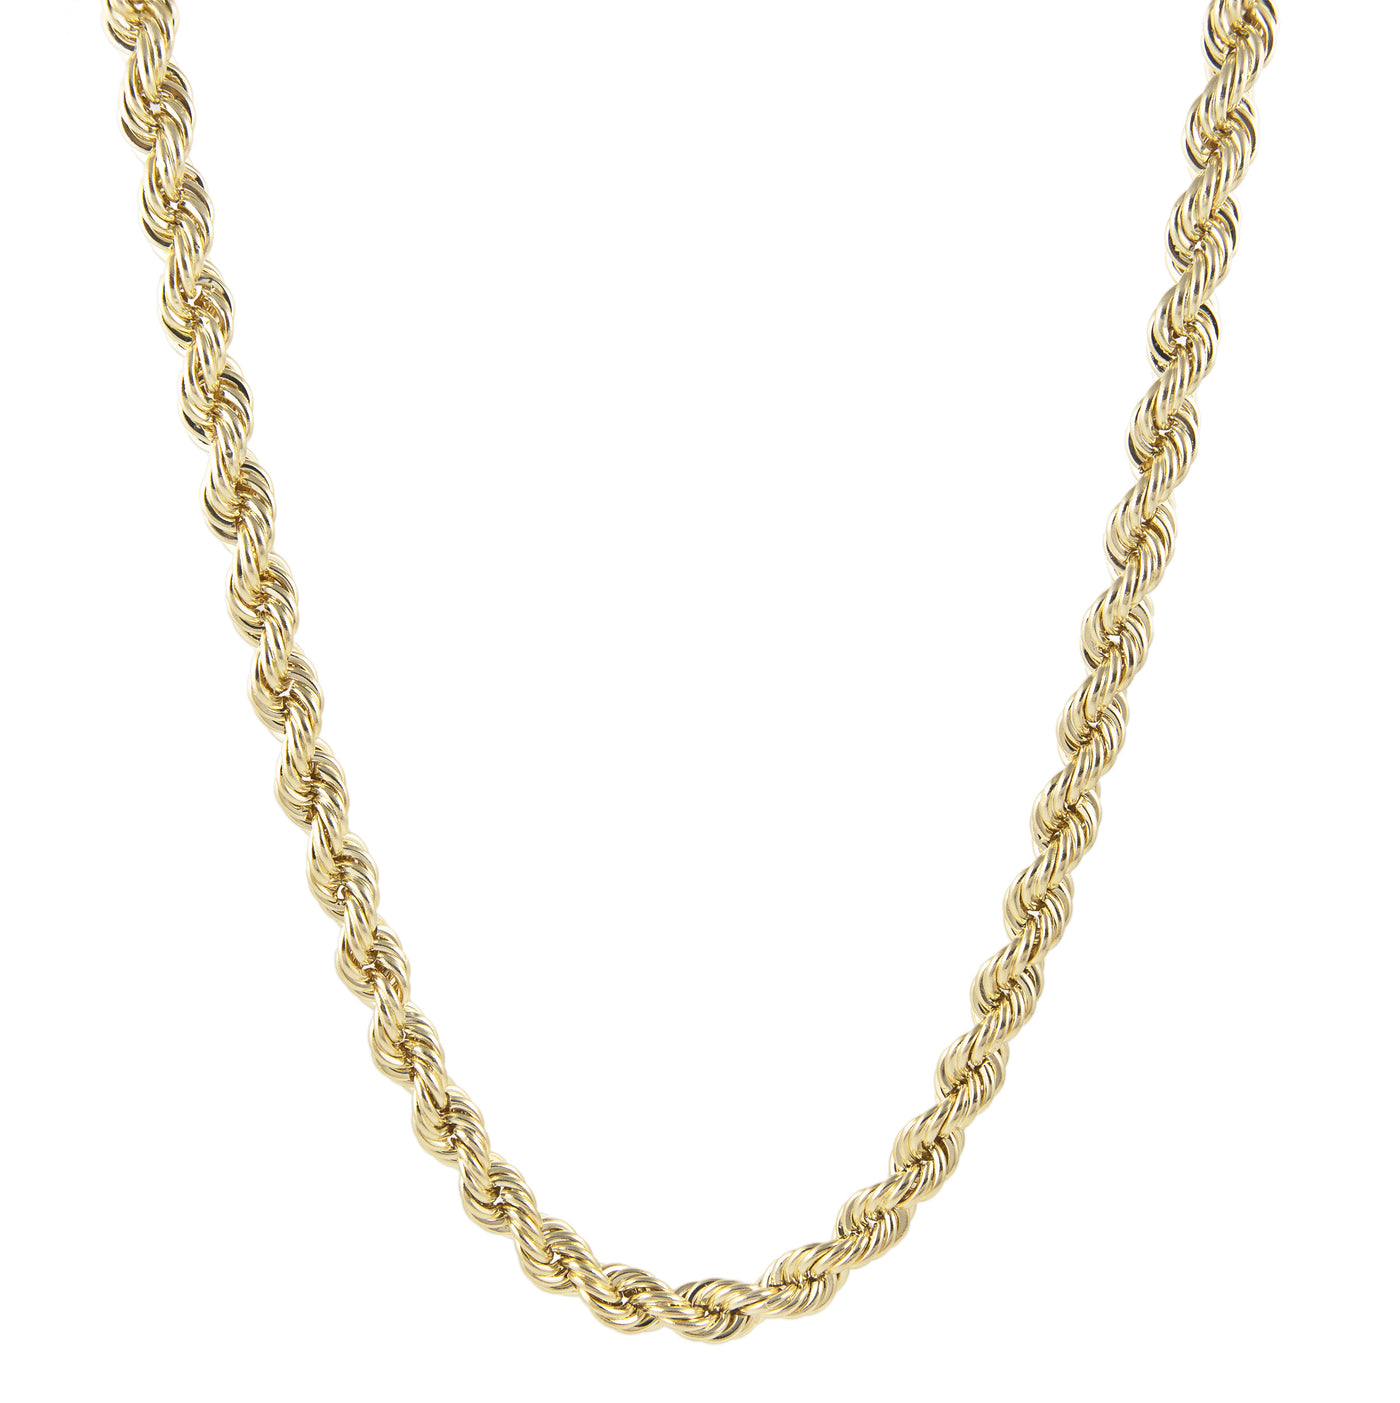 Rope Chain Necklace 10K Yellow Gold - Hollow